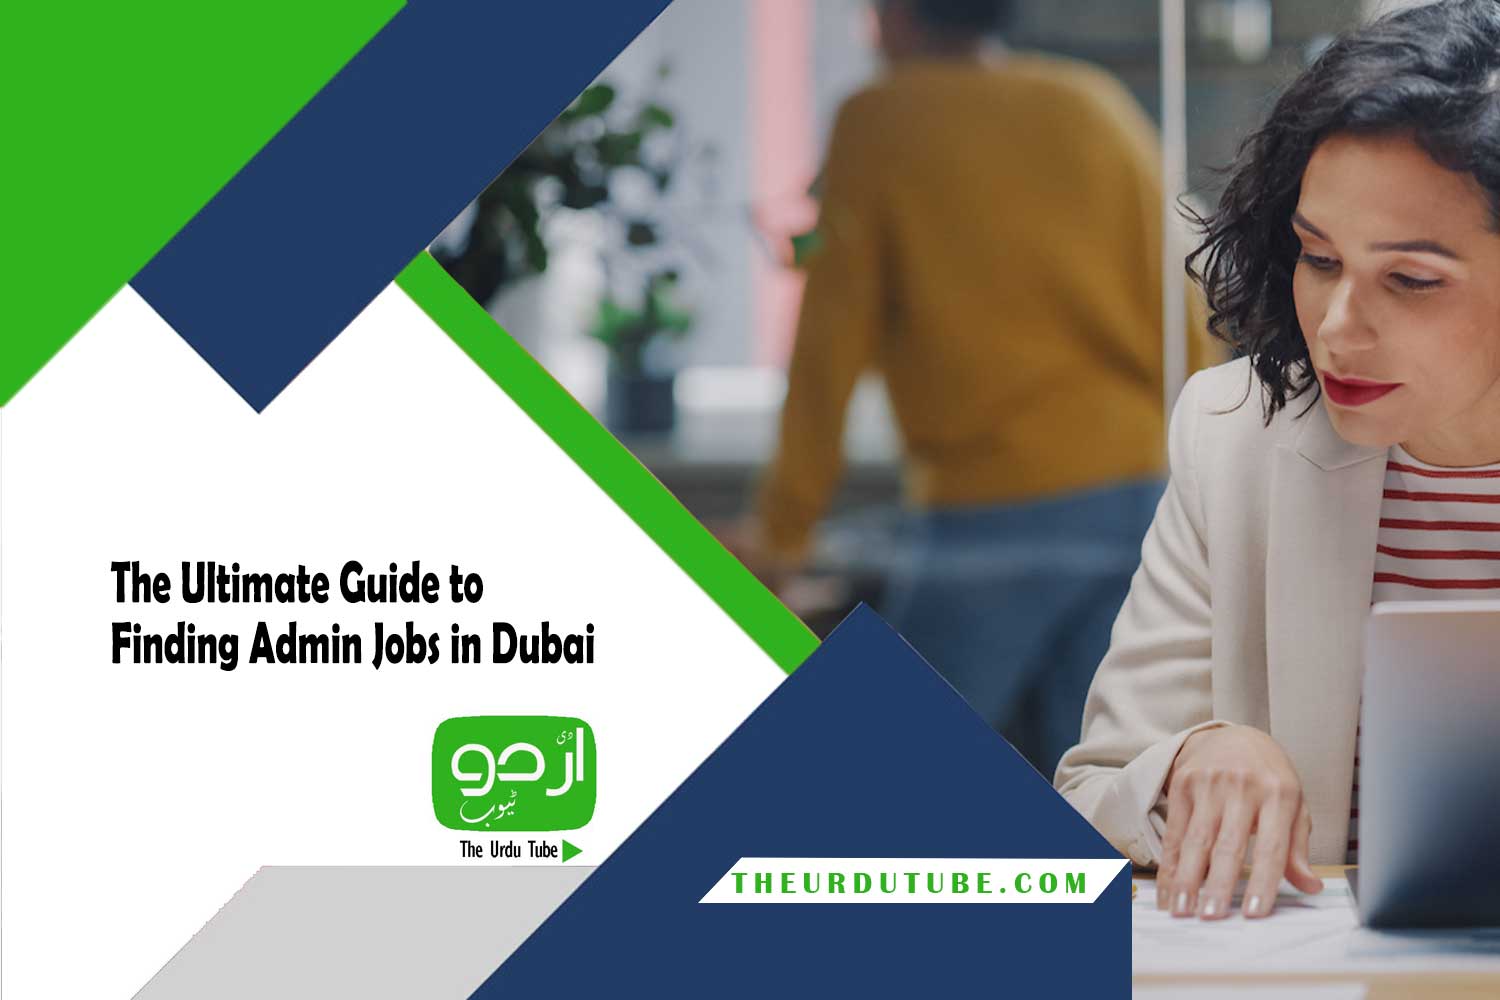 The Ultimate Guide to Finding Admin Jobs in Dubai